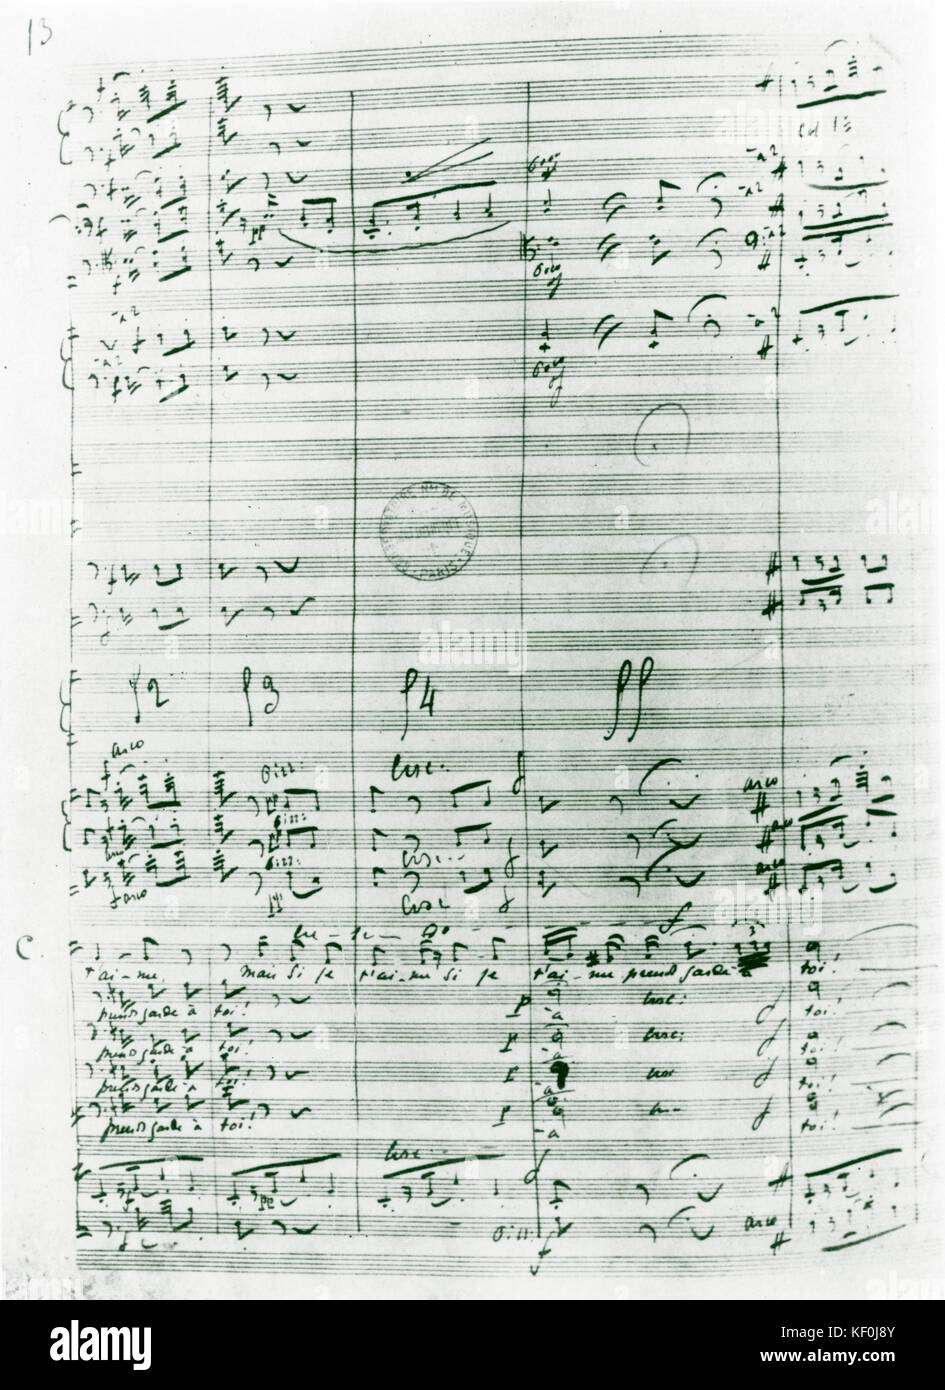 Georges Bizet - CARMEN, score from Habanera in Bizet's handwriting. 1838-1875. French Composer. Stock Photo